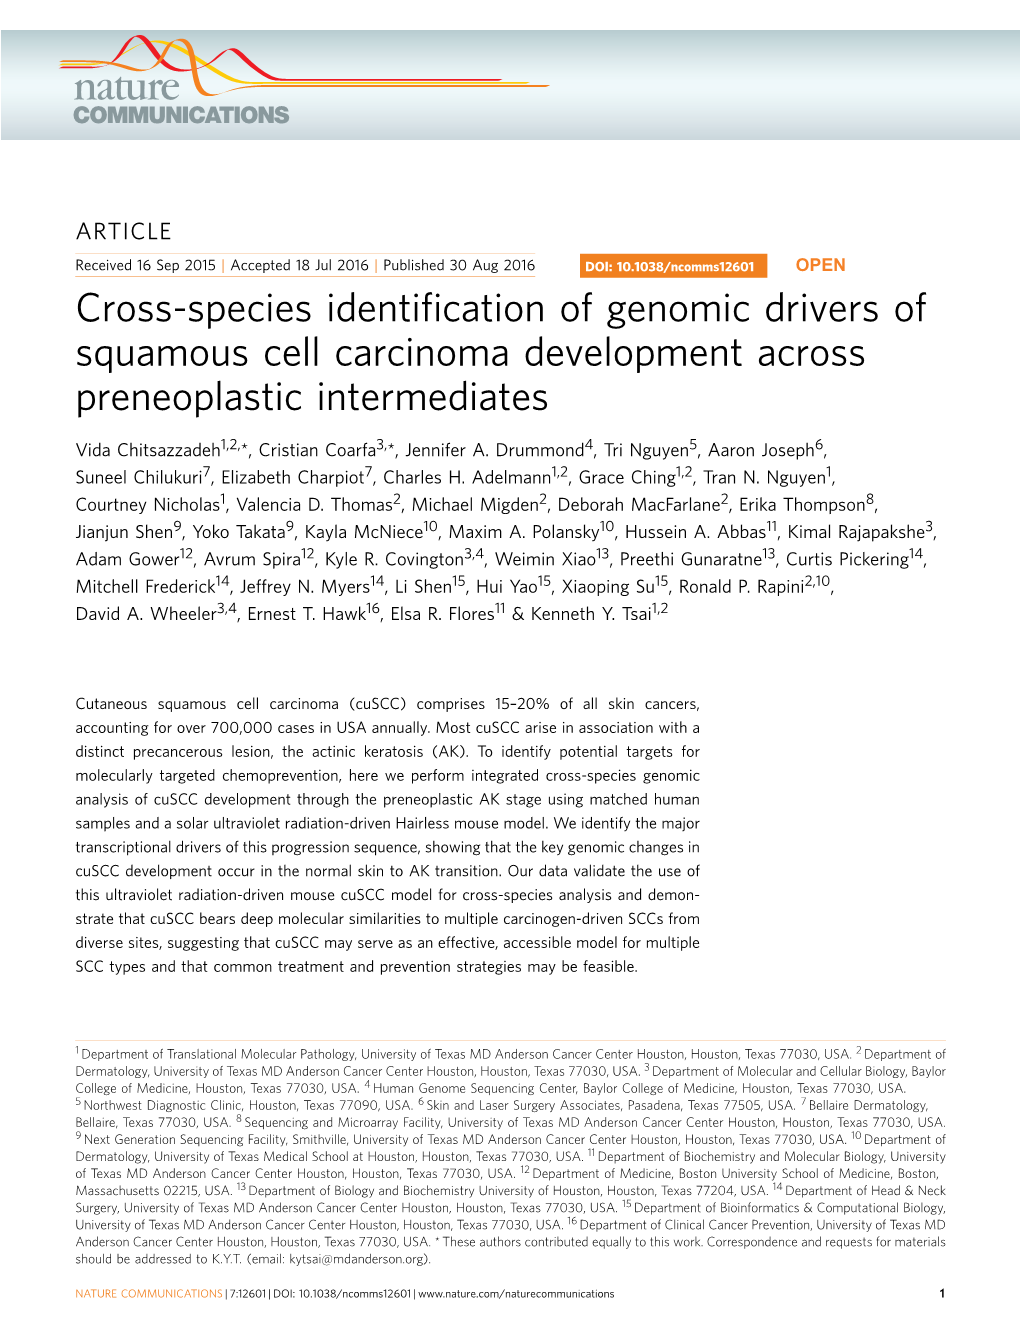 Cross-Species Identification of Genomic Drivers of Squamous Cell